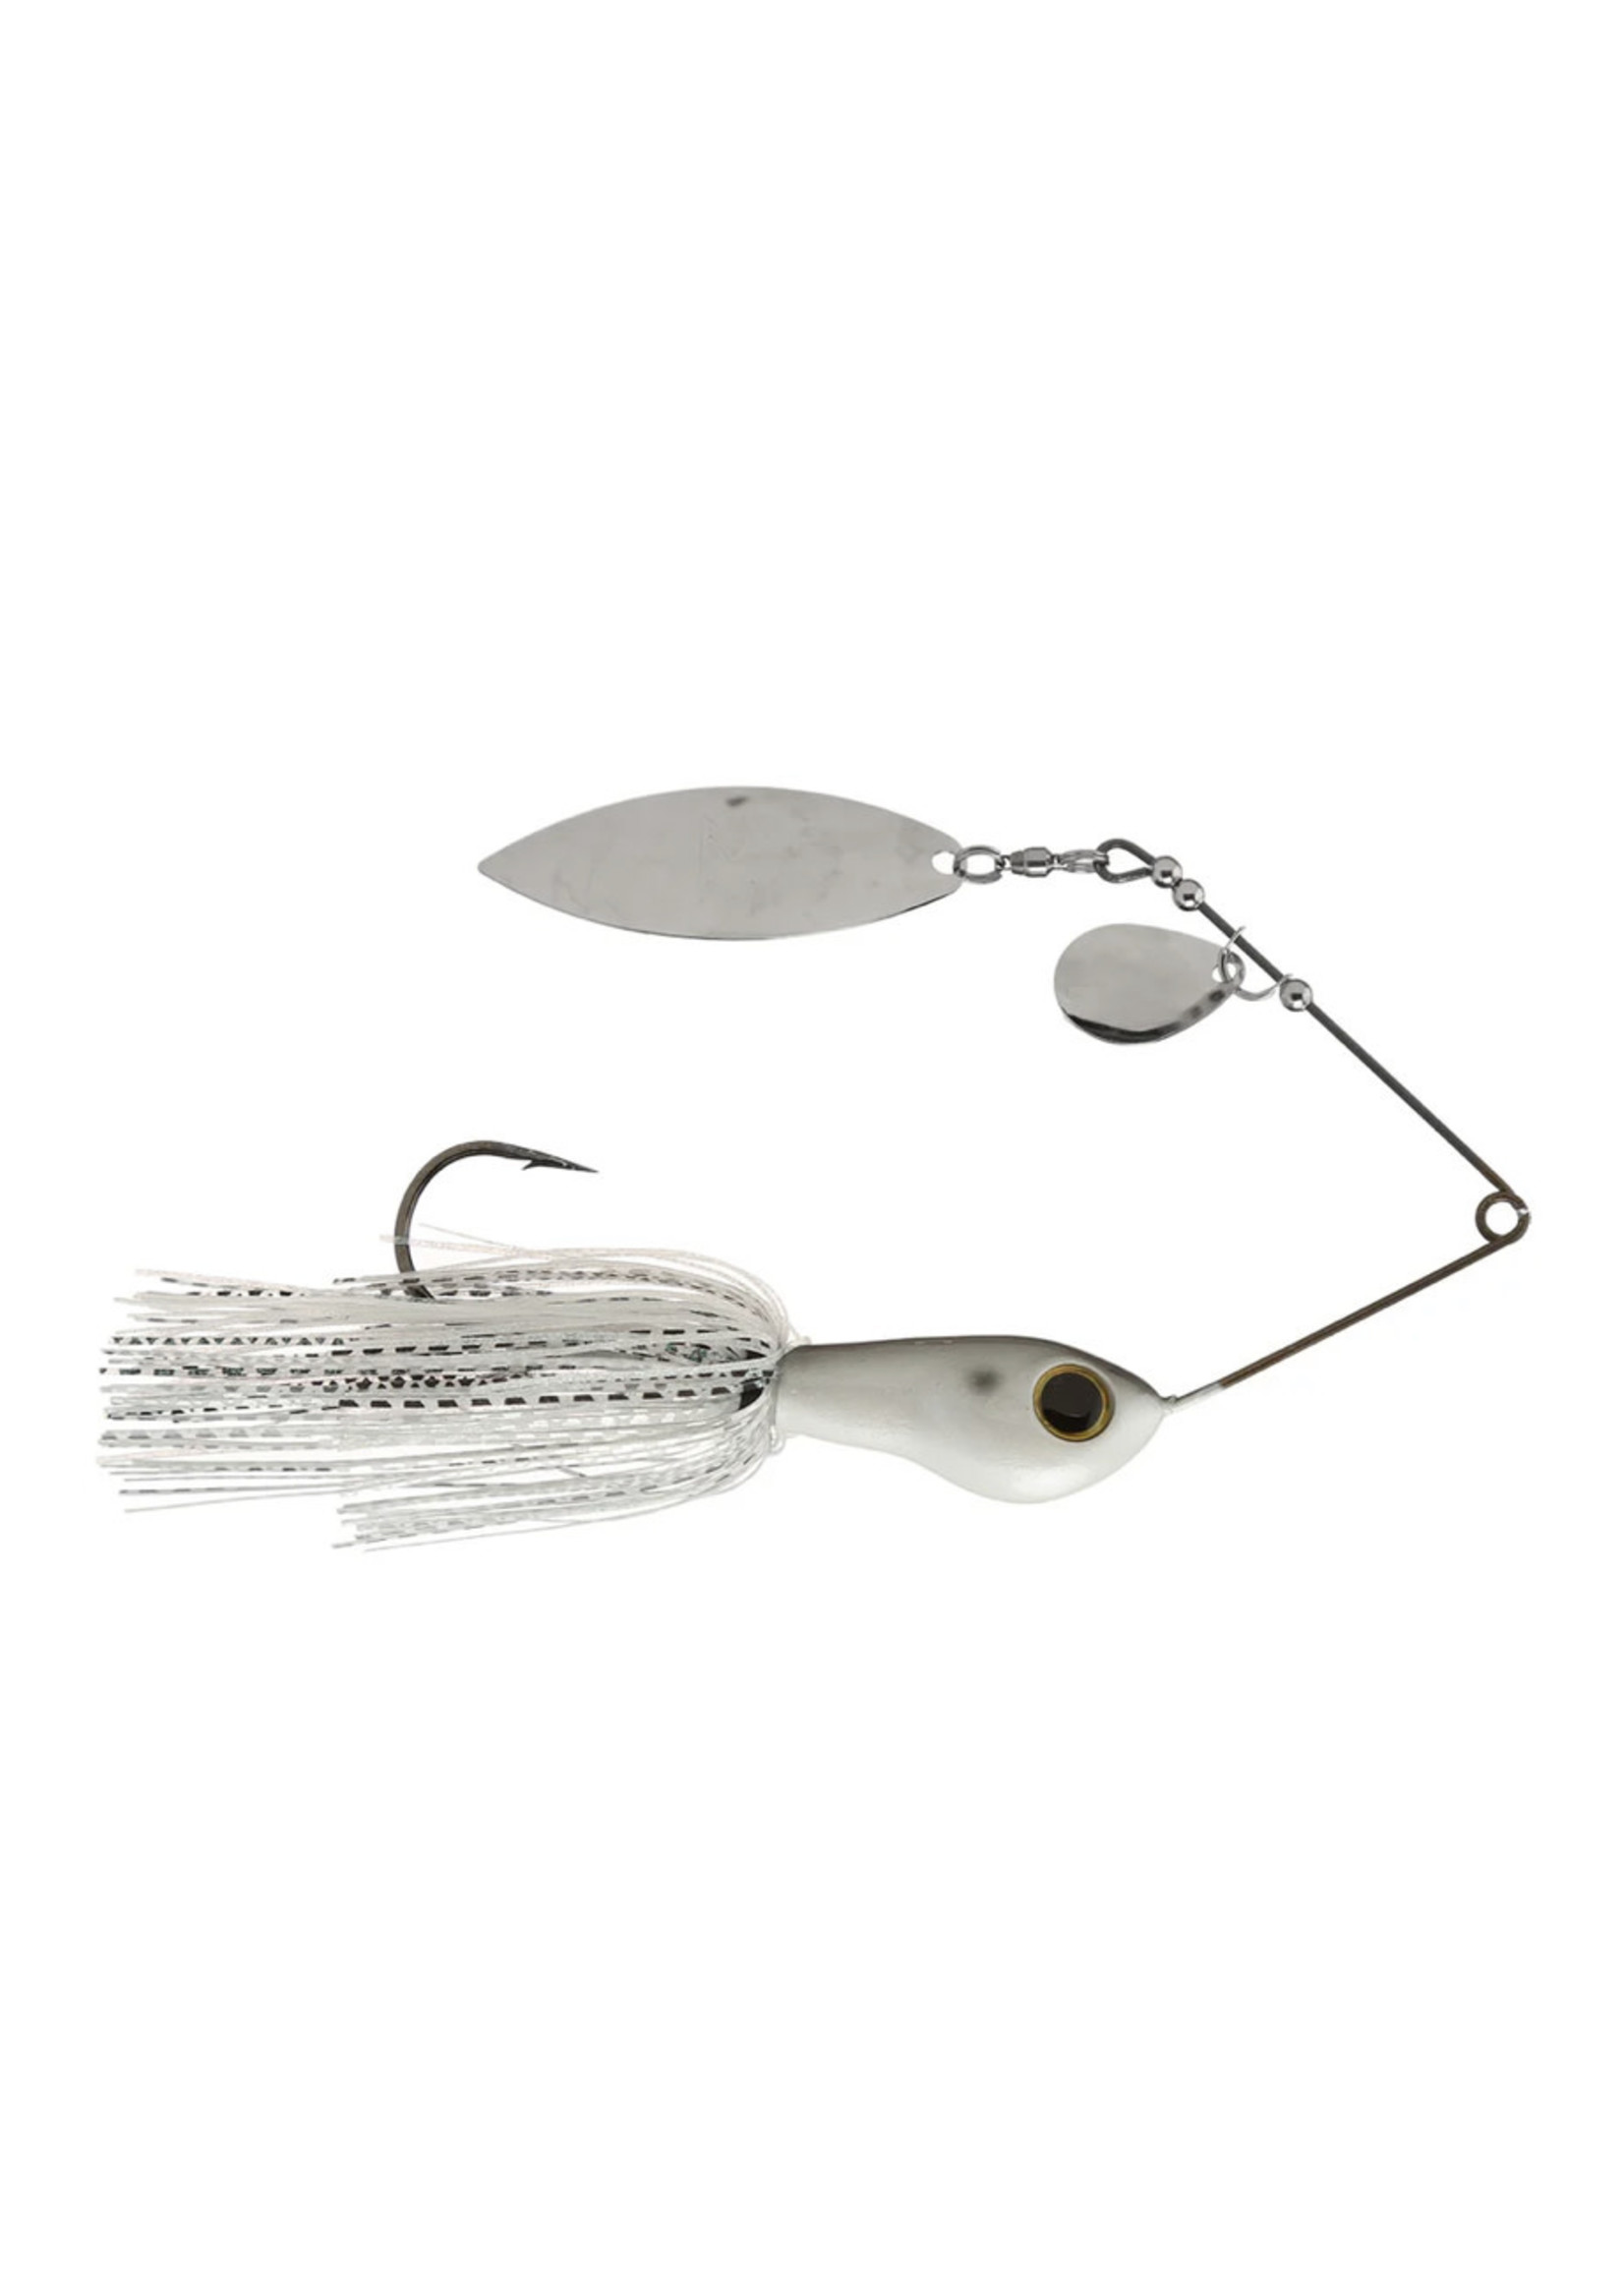 PICASSO PICASSO BLUFF DIVER SPINNER BAIT - Rugged Shoal Outfitters